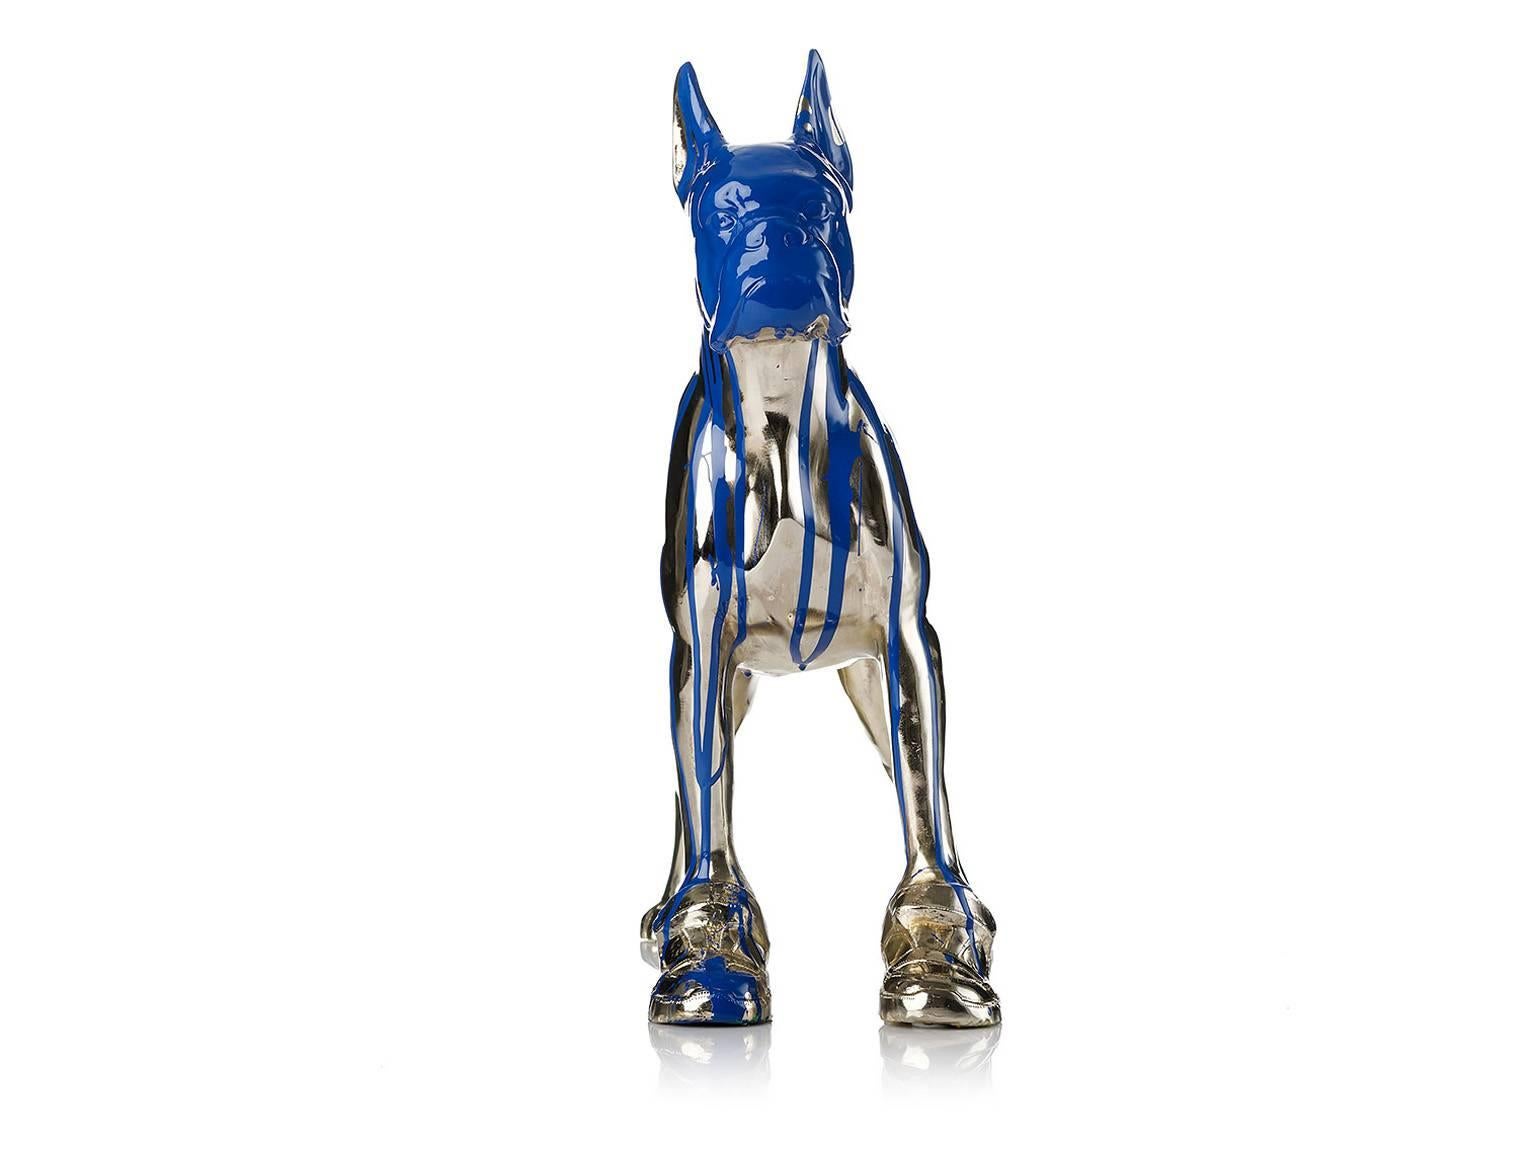 Cloned Bulldog with pet bottle  - Gold Figurative Sculpture by William Sweetlove